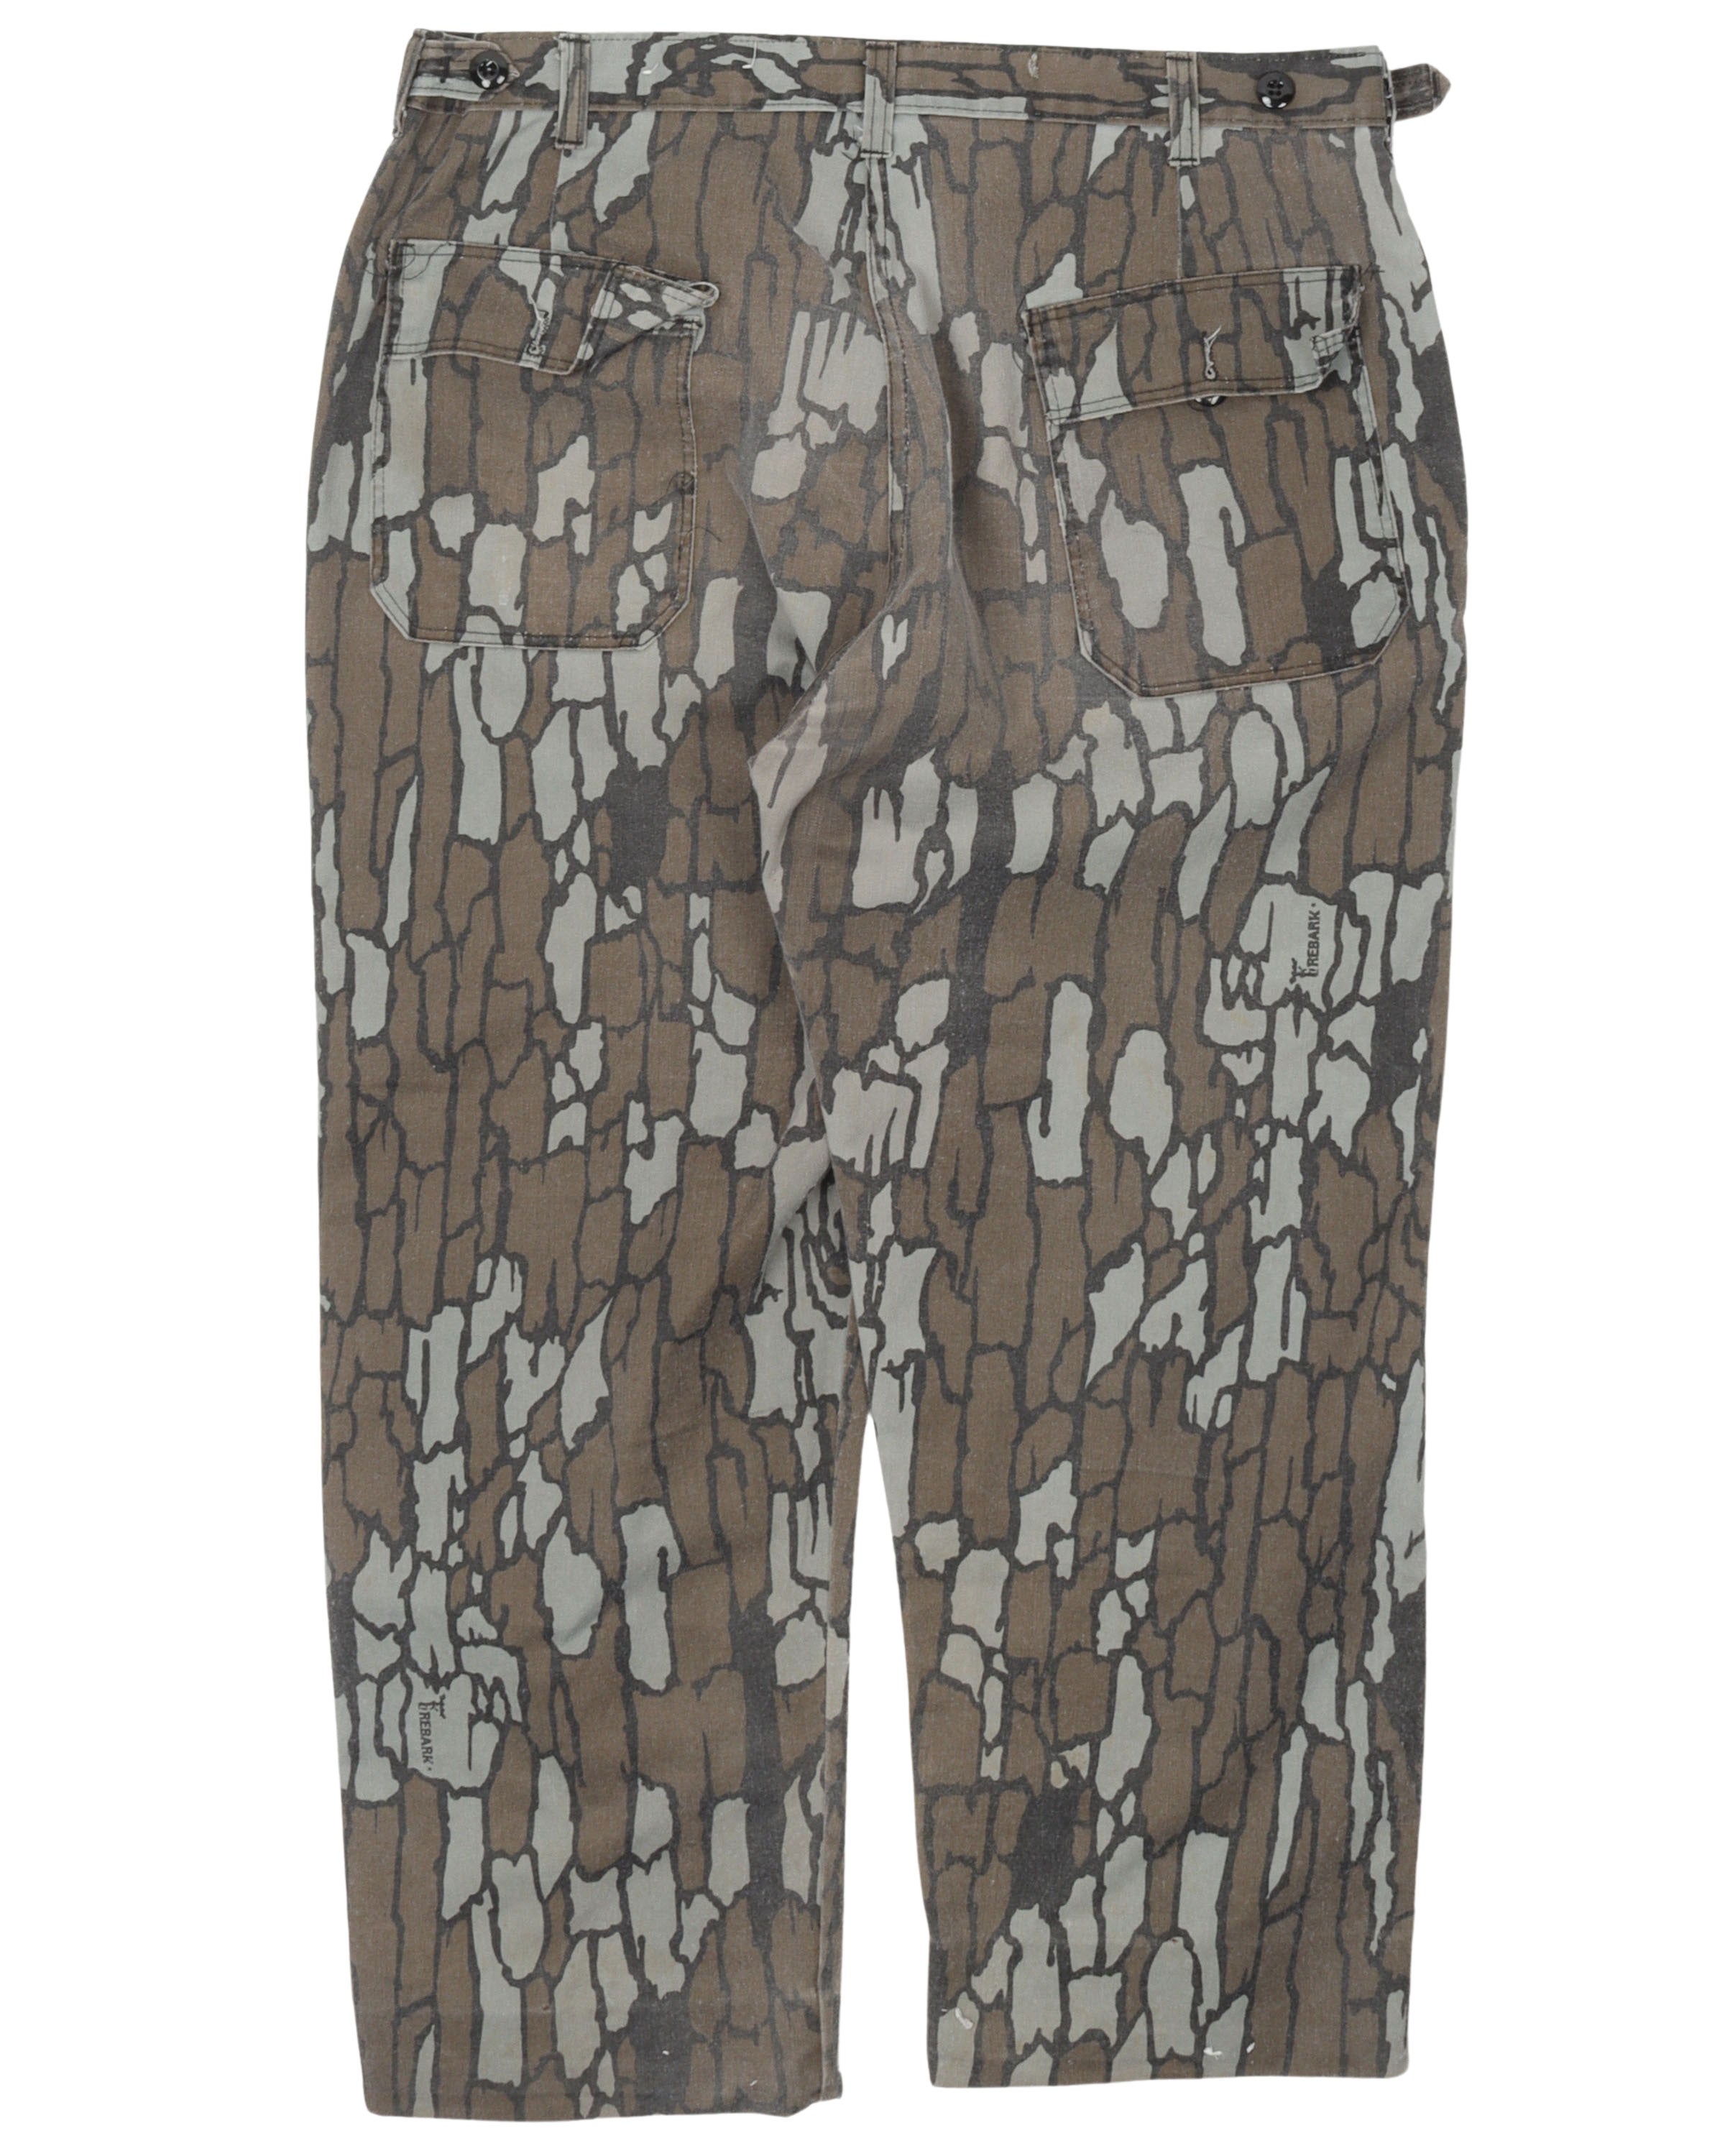 RealTree Birch Camouflage Pants